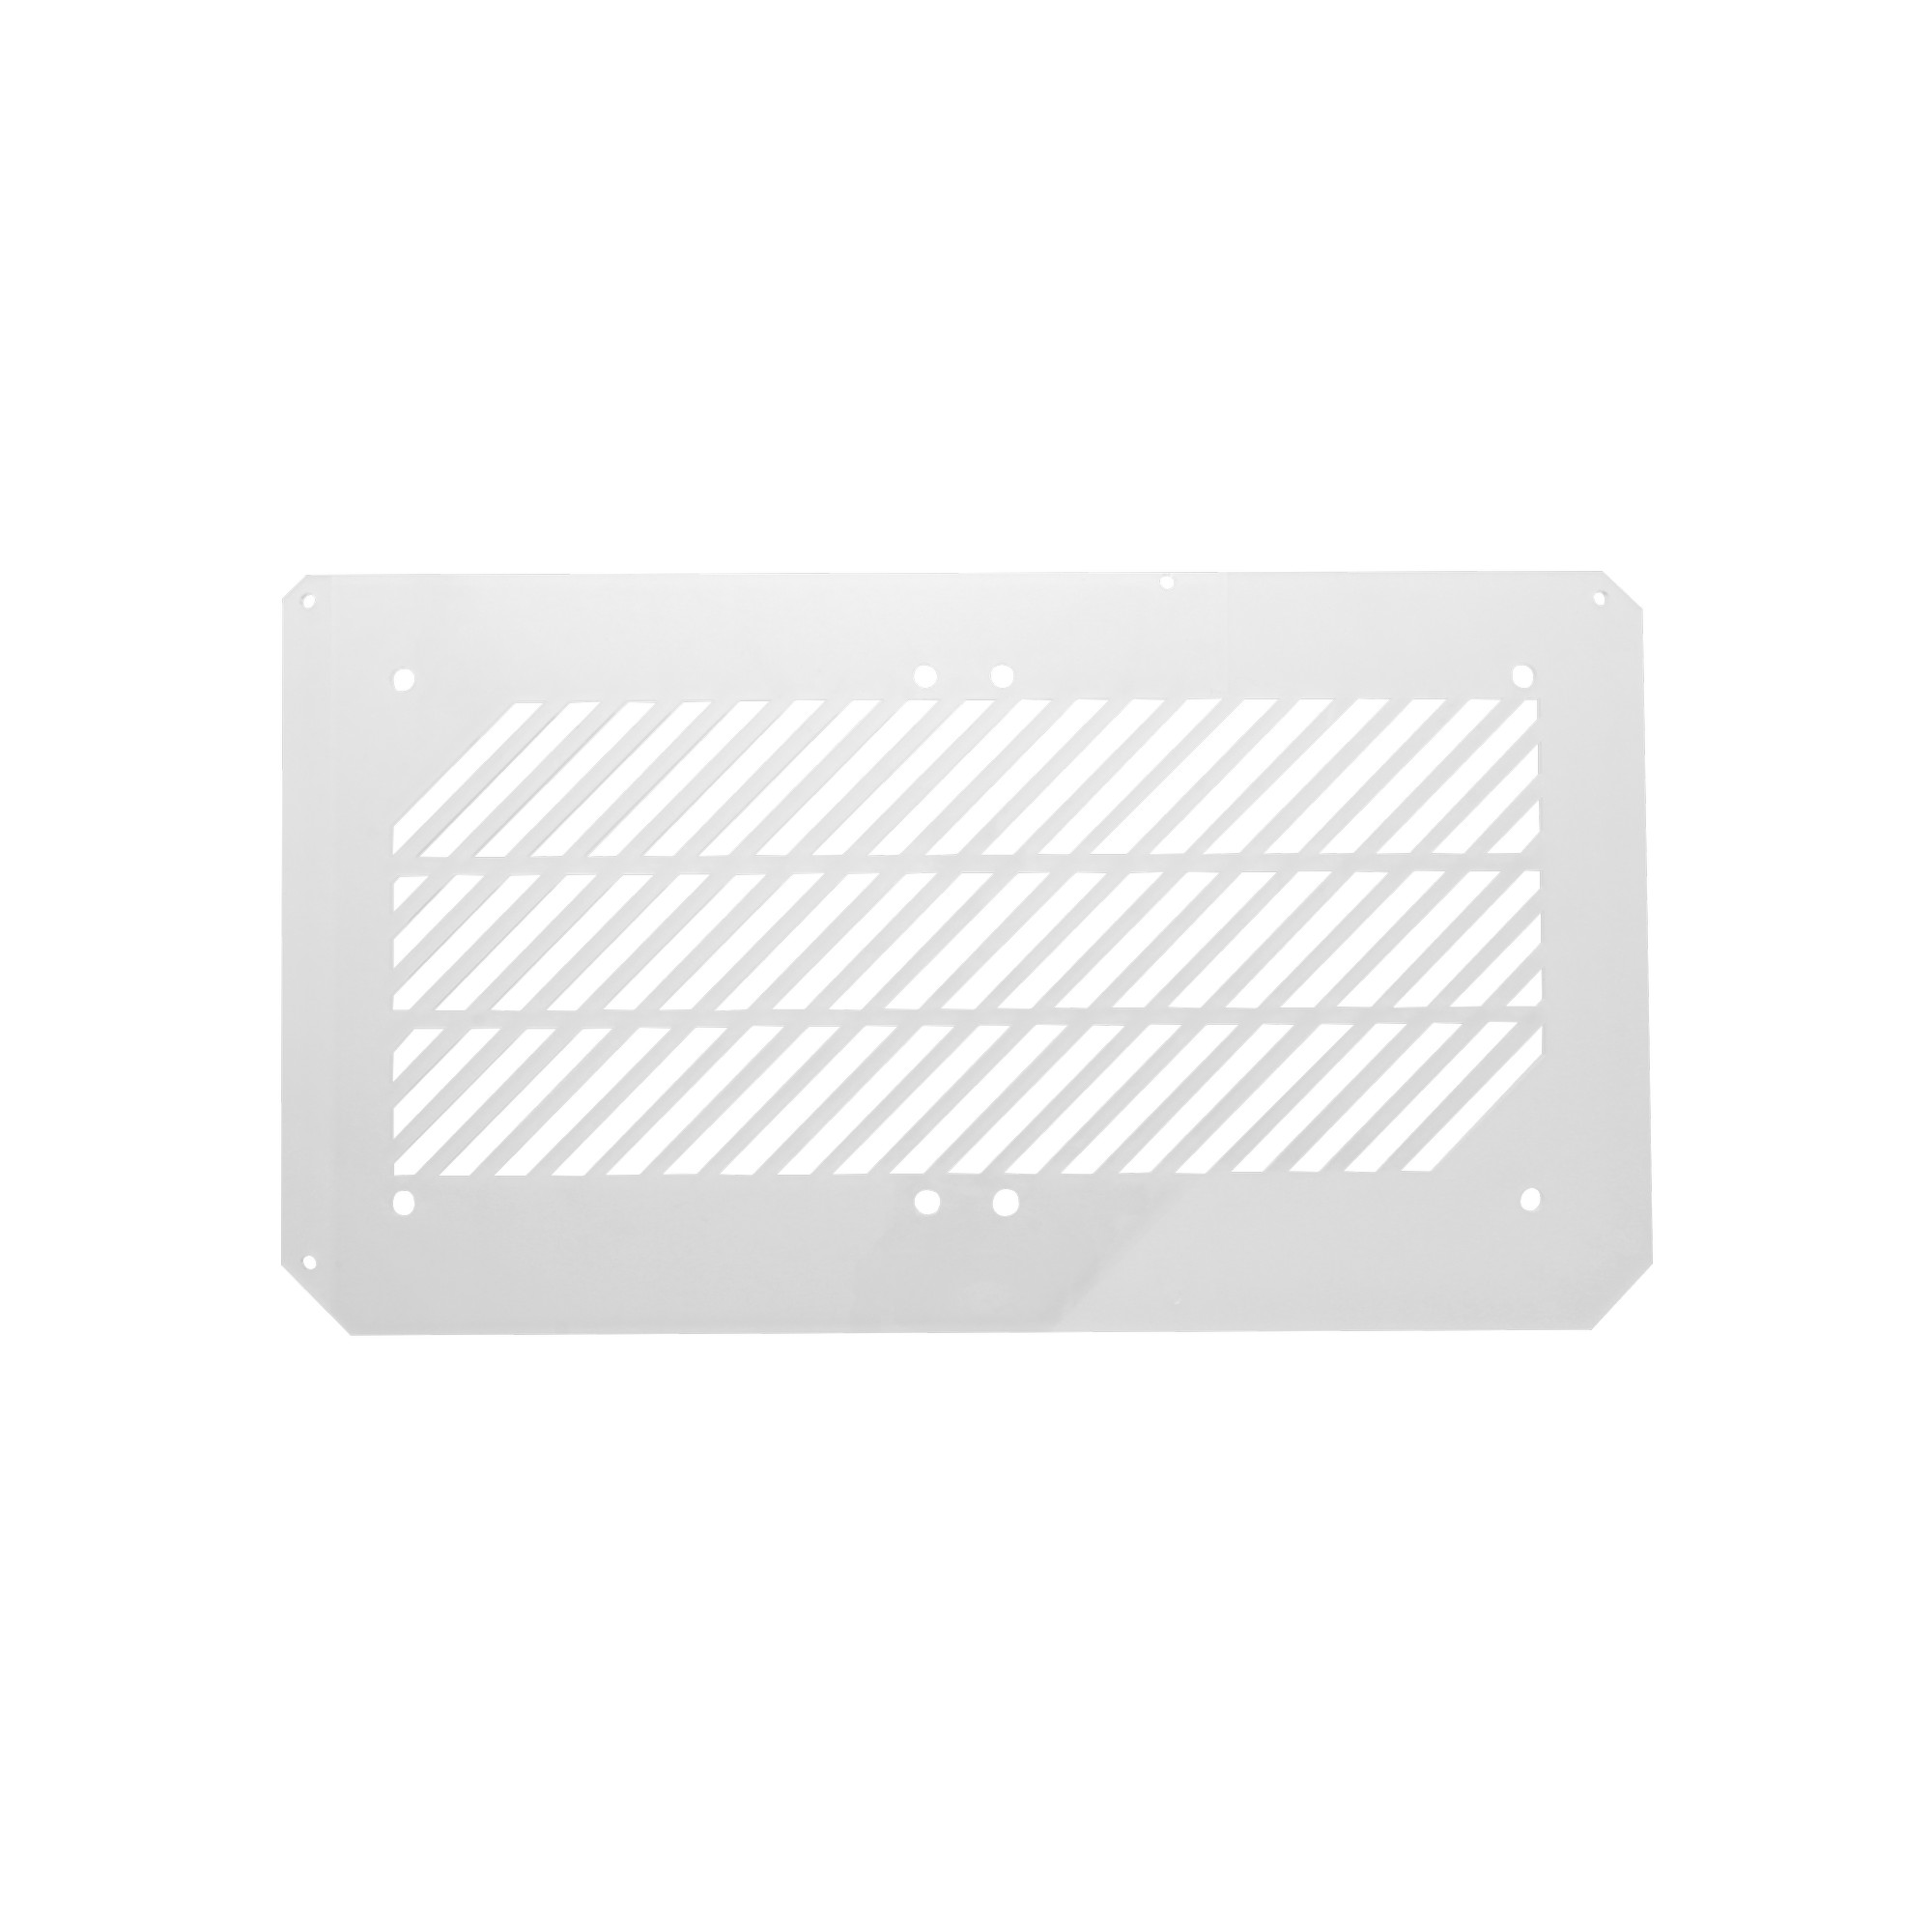 Lazer3D LZ7 XTD Left Panel - Clear Window Fusion Slotted